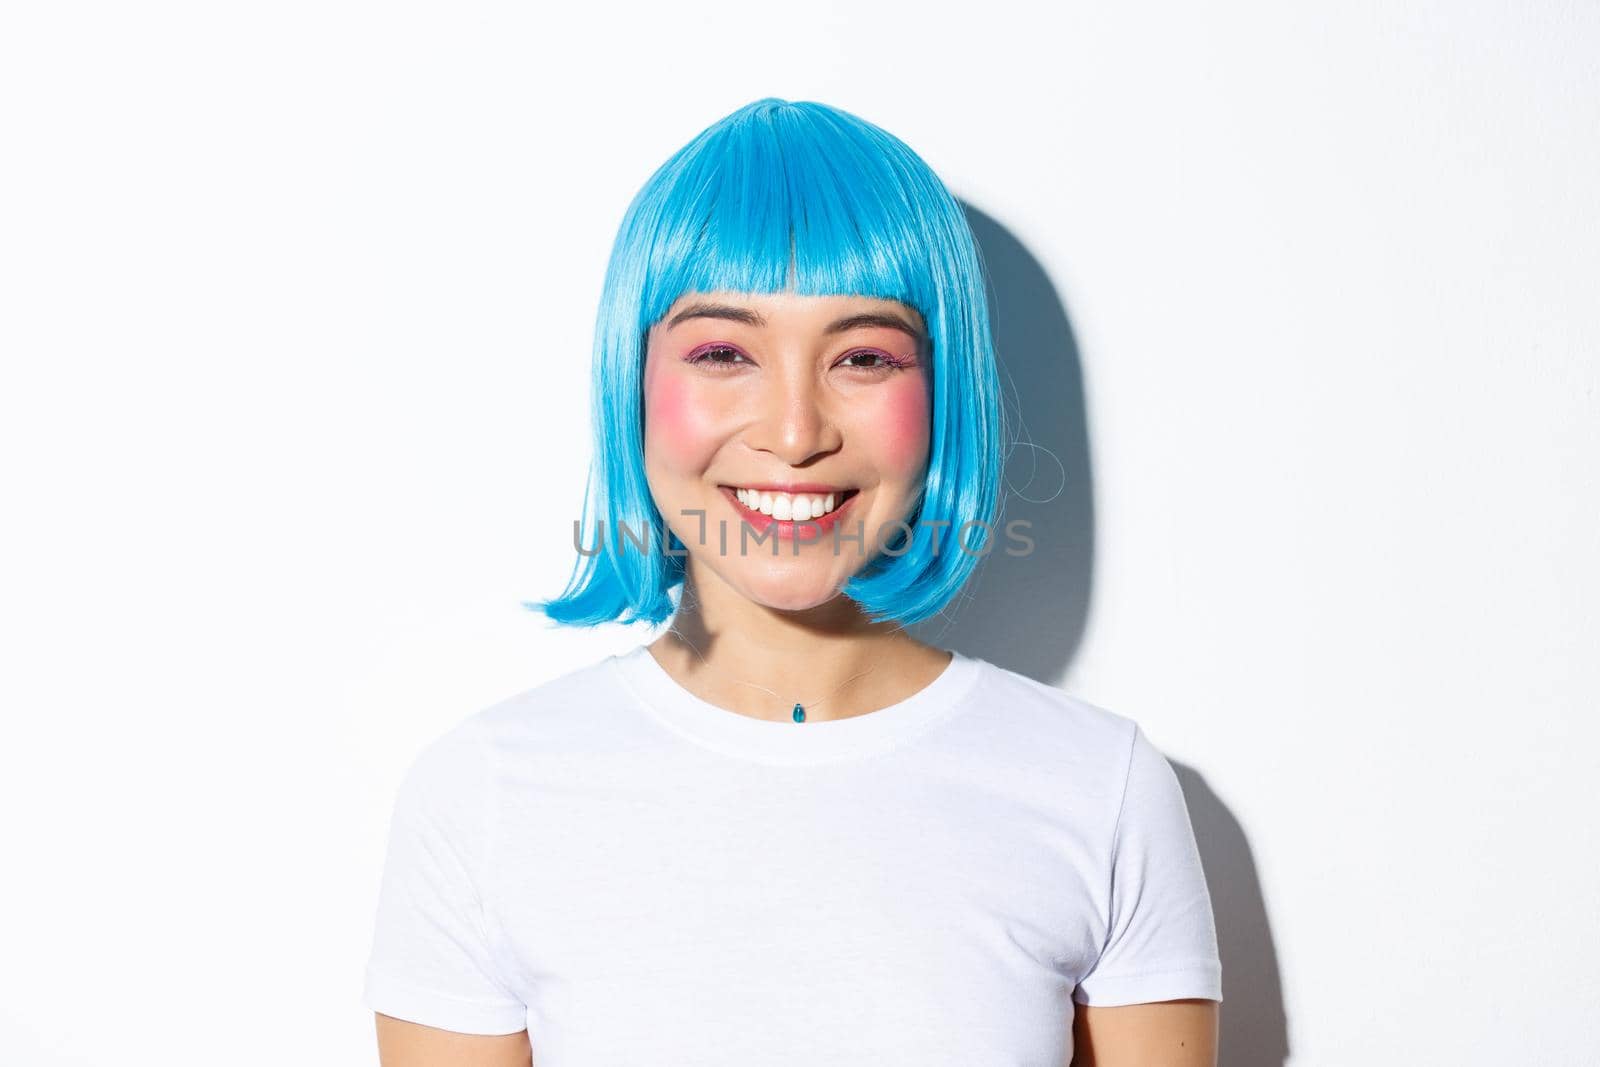 Close-up of cute asian female celebrating halloween in blue wig, smiling happy at camera, standing over white background.